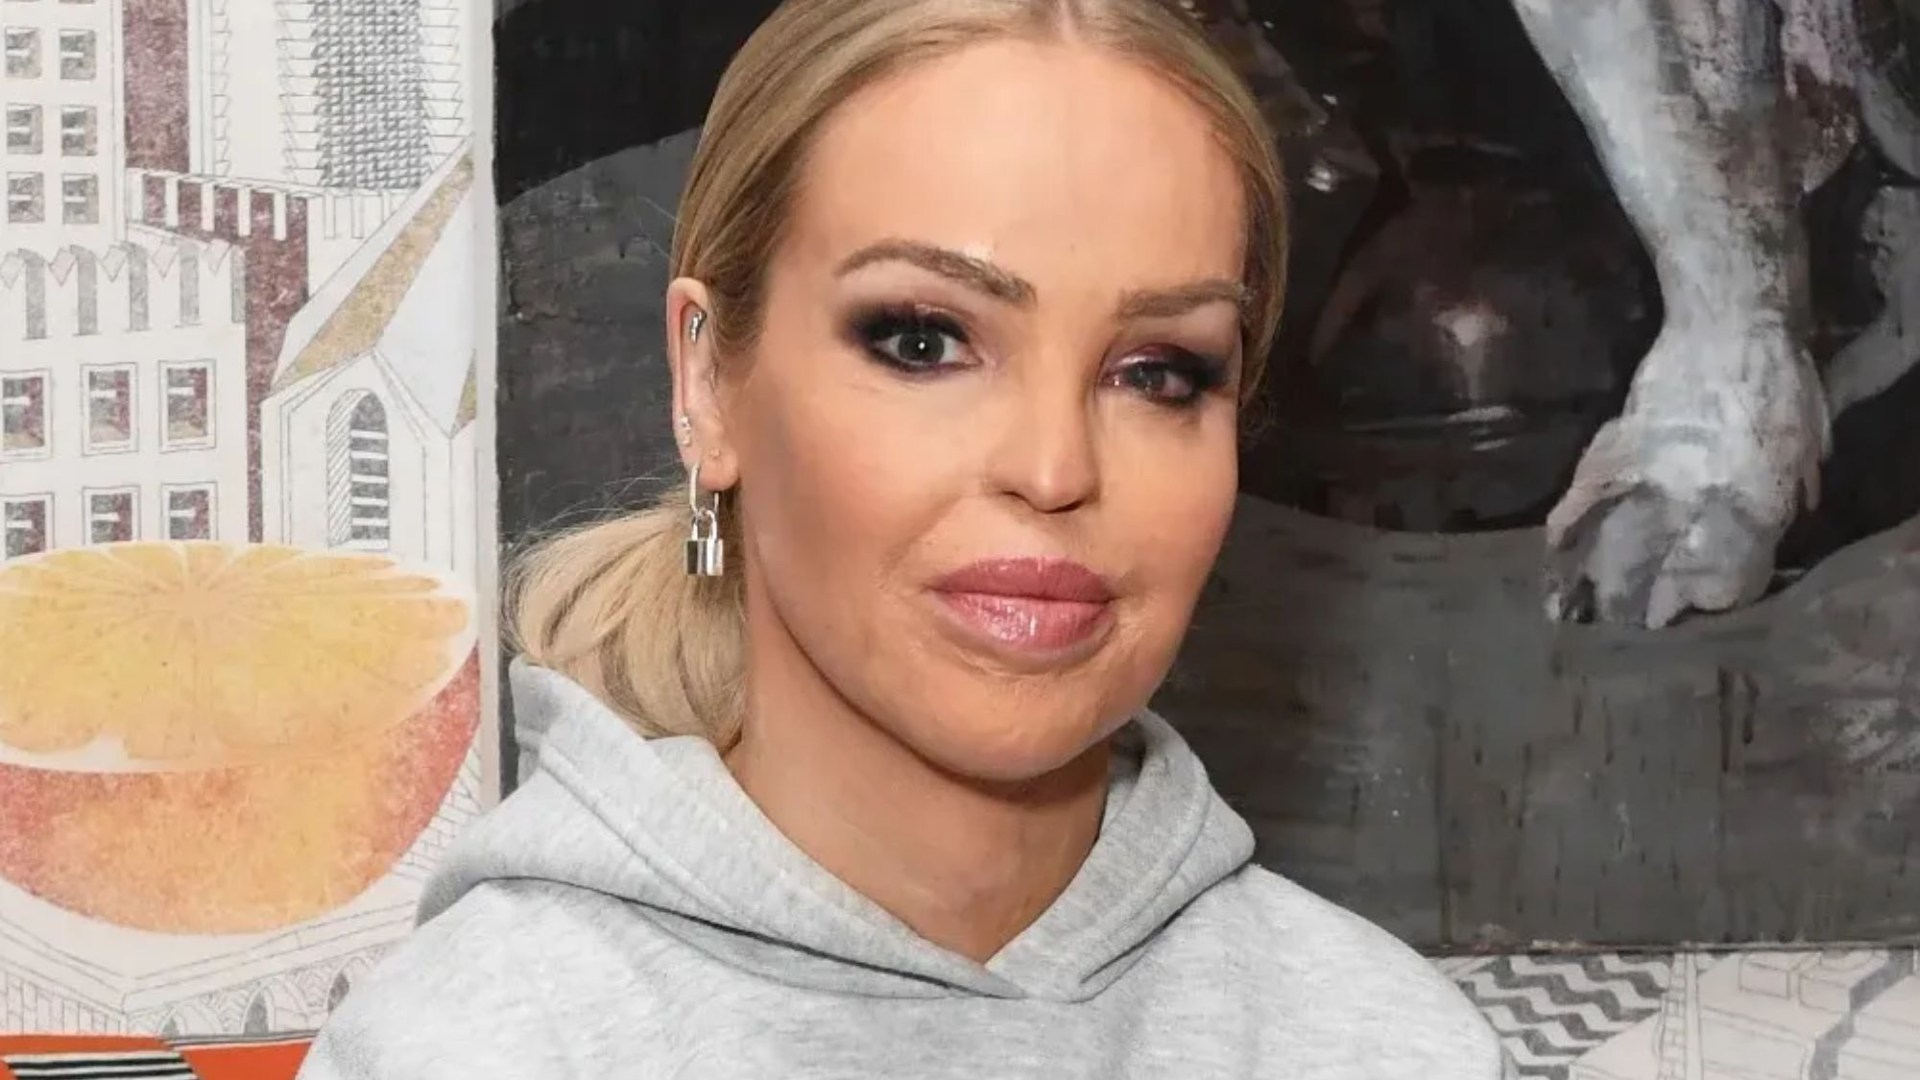 Courageous Acid Attack Survivor Katie Piper Donates £1,000 to Support Mother Injured in Clapham Attack